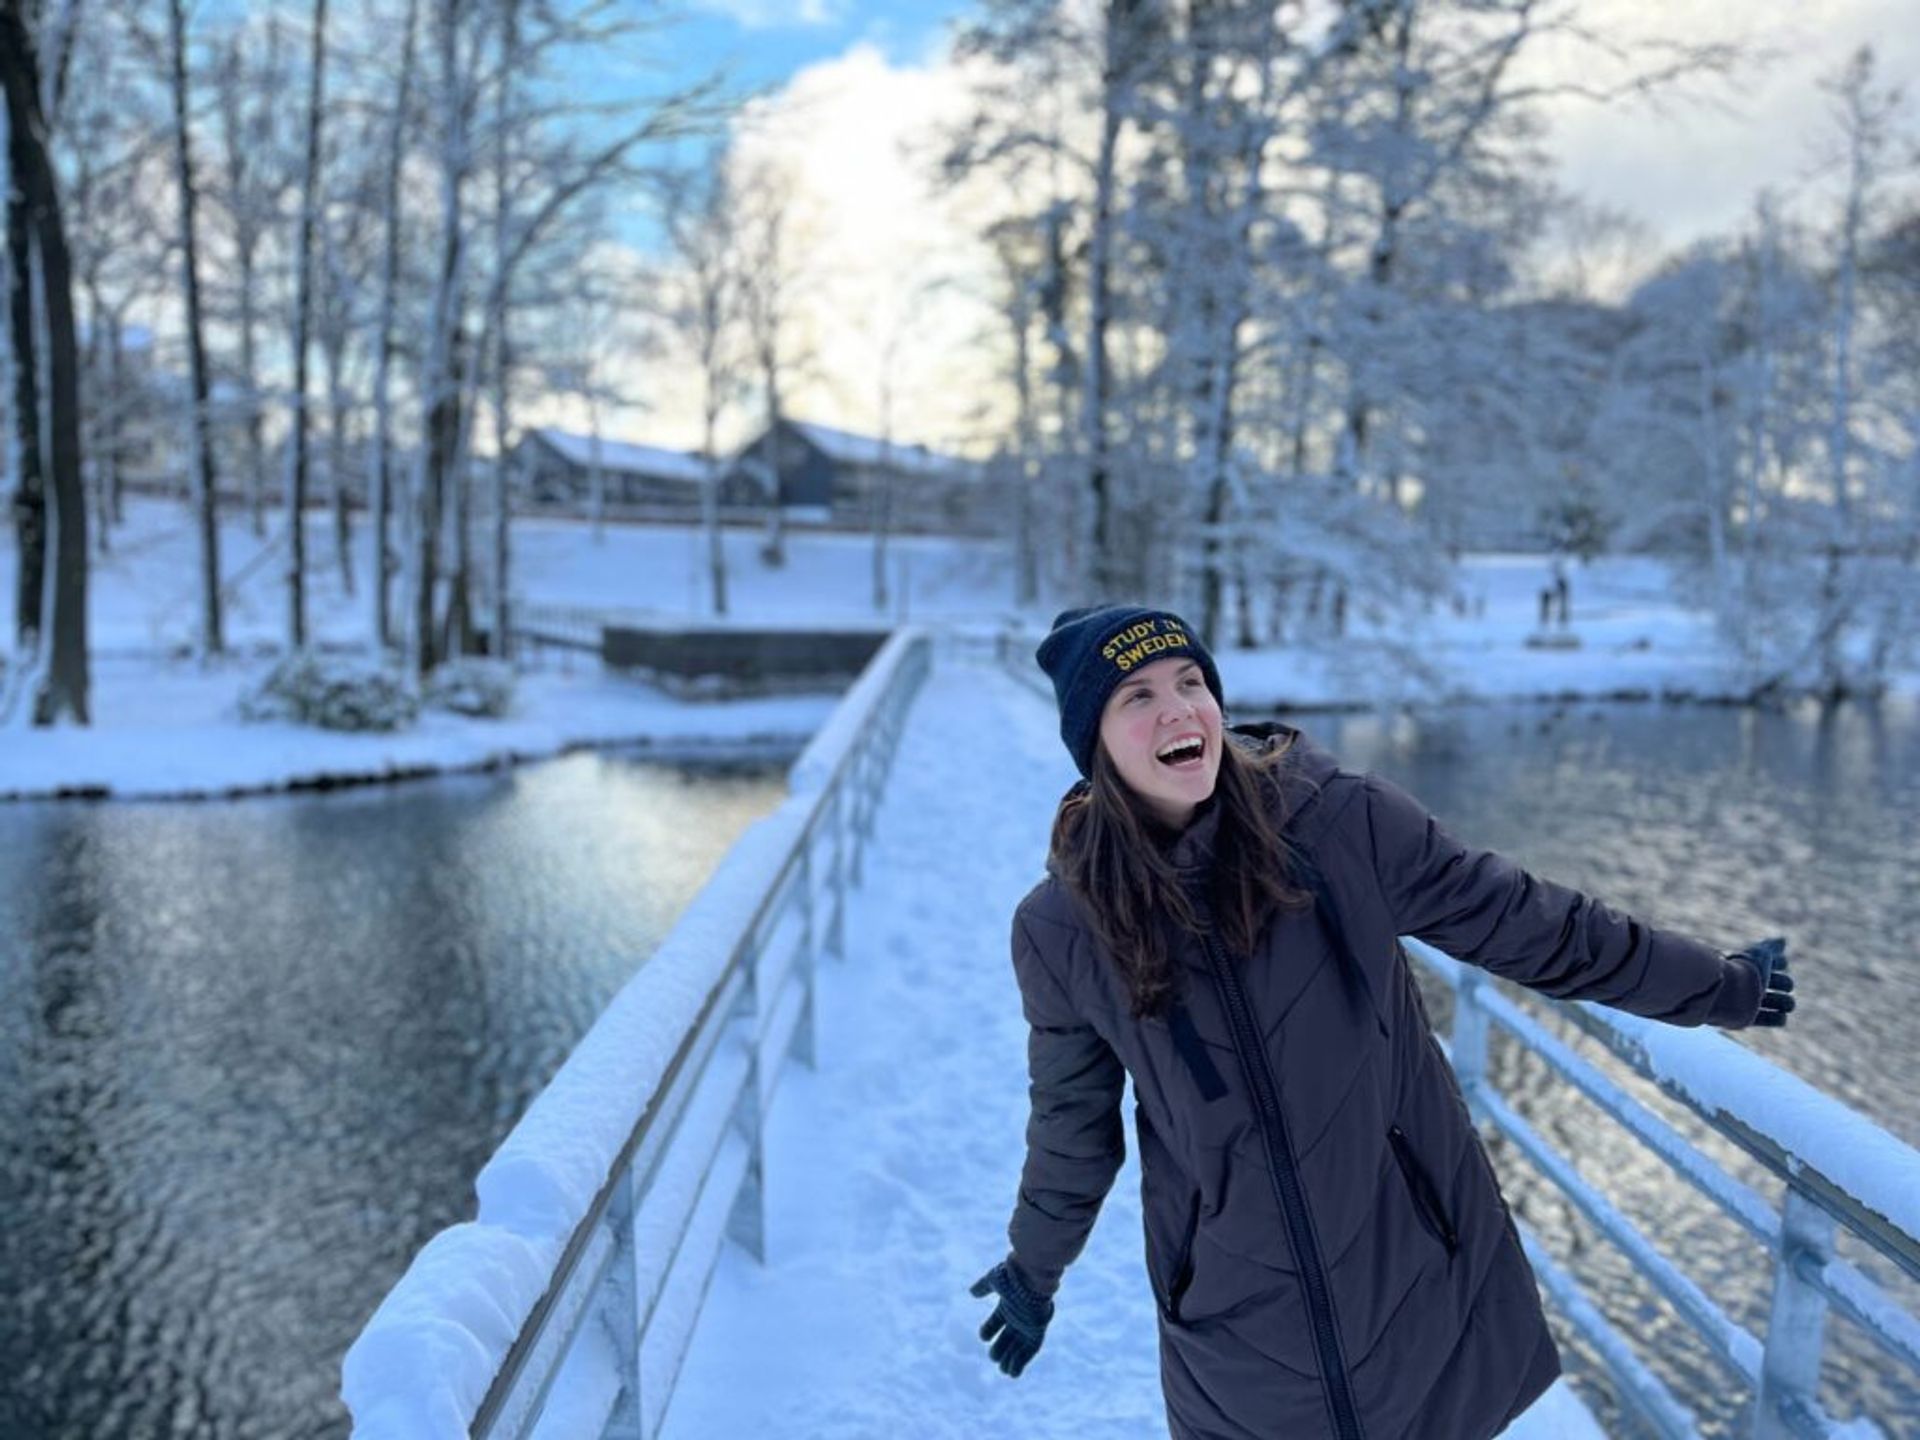 A girl laughing on a bridge covered with snow.